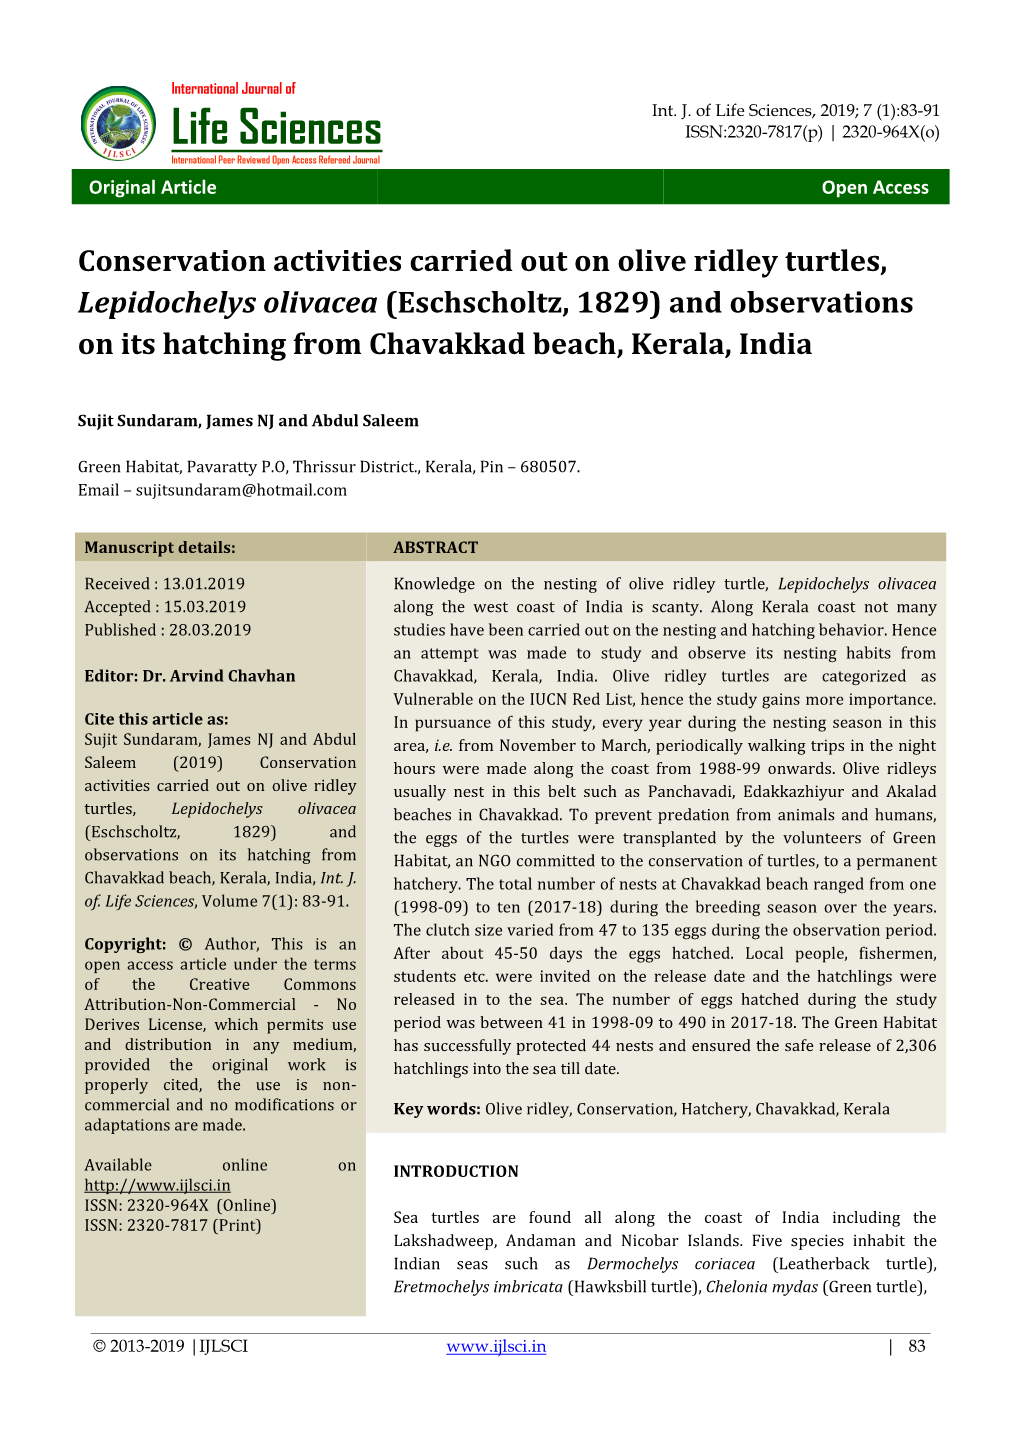 Conservation Activities Carried out on Olive Ridley Turtles, Lepidochelys Olivacea